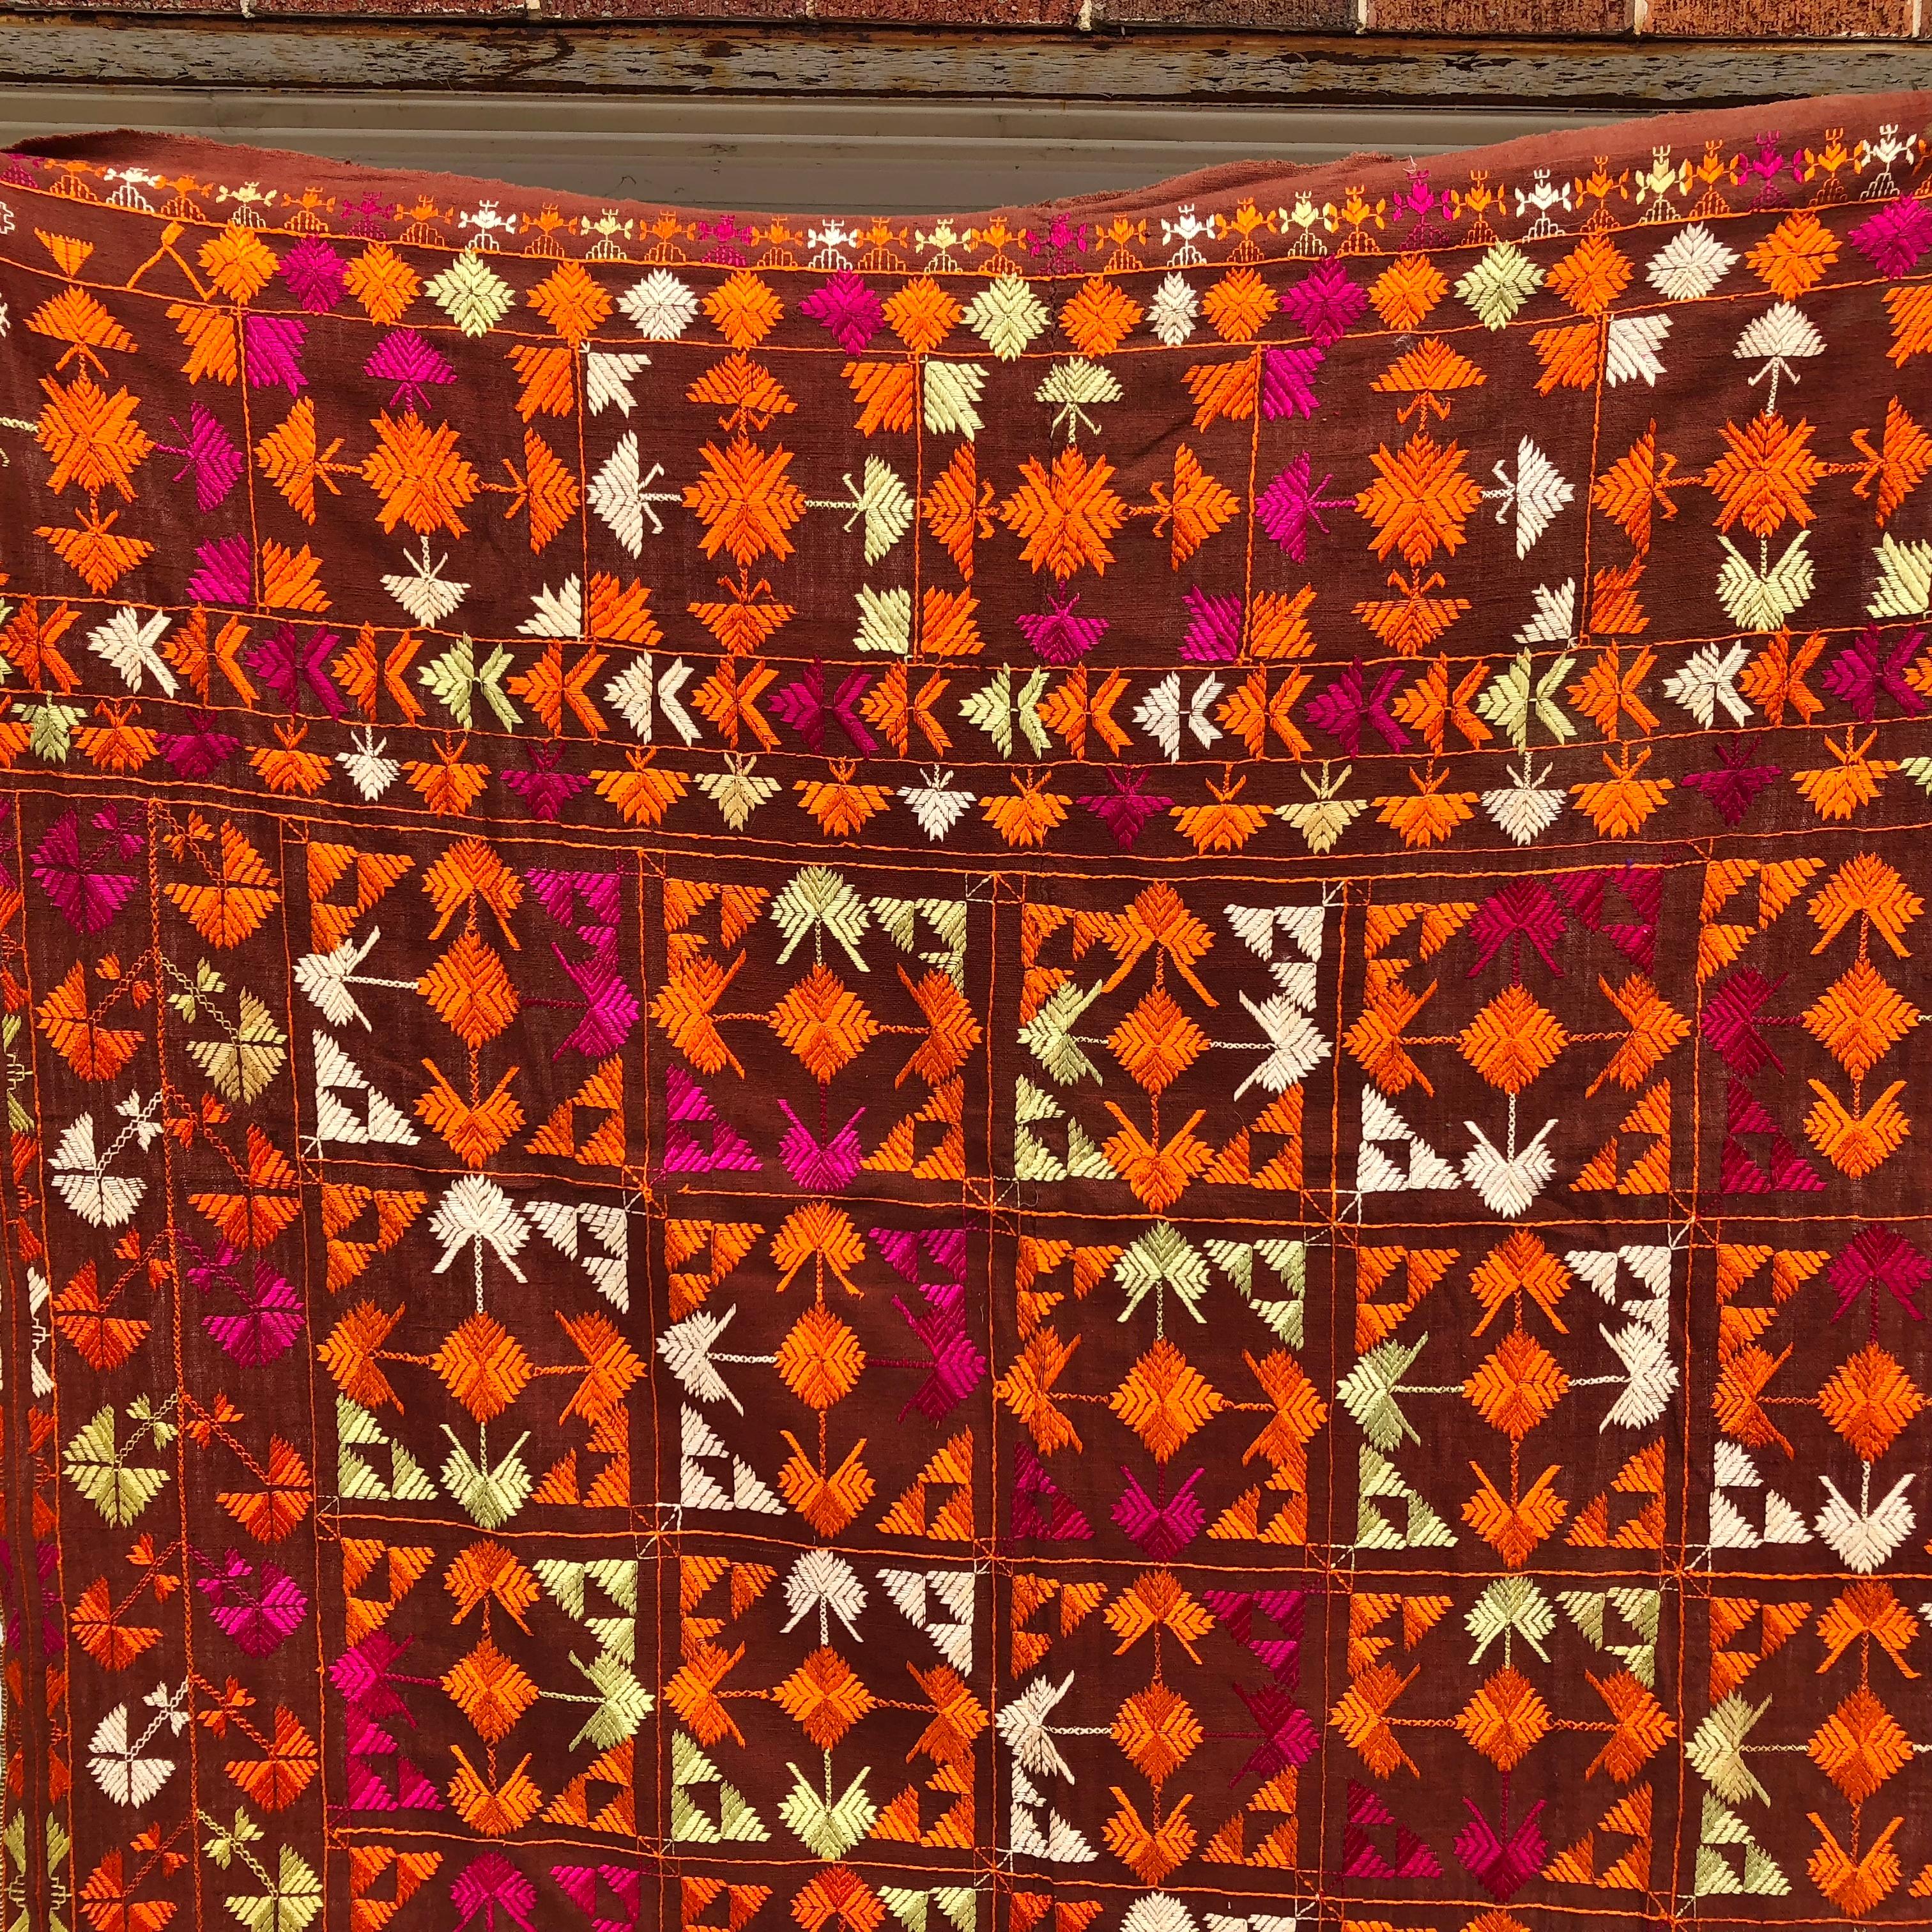 Vintage Phulkari wedding shawl from Punjab, India. The textile is hand loomed cotton khadi cloth that is hand embroidered with vibrant silk threads by relatives of the young girl's family for her wedding and other special occasions. The shawl is in